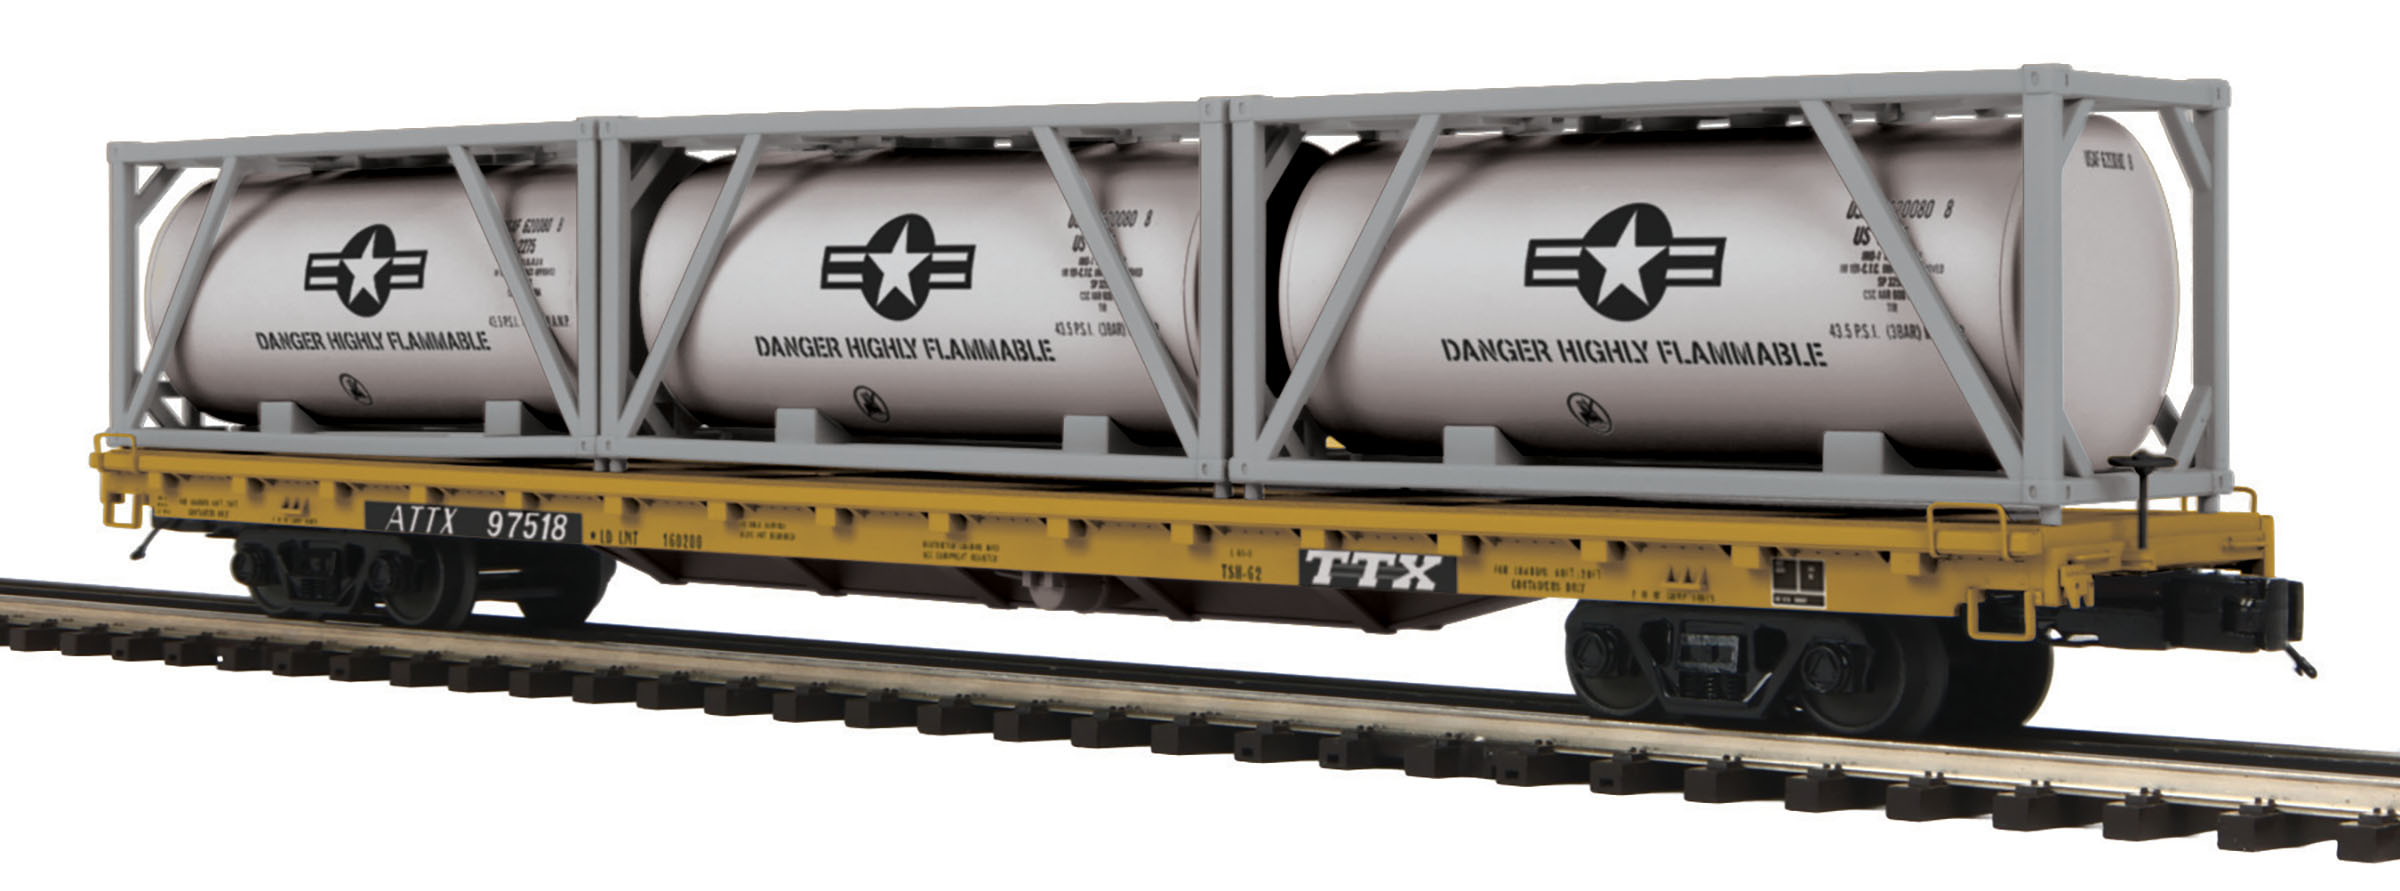 U.S. Air Force Rocket Fuel 60' Flat Car w/(3) Tank Containers image